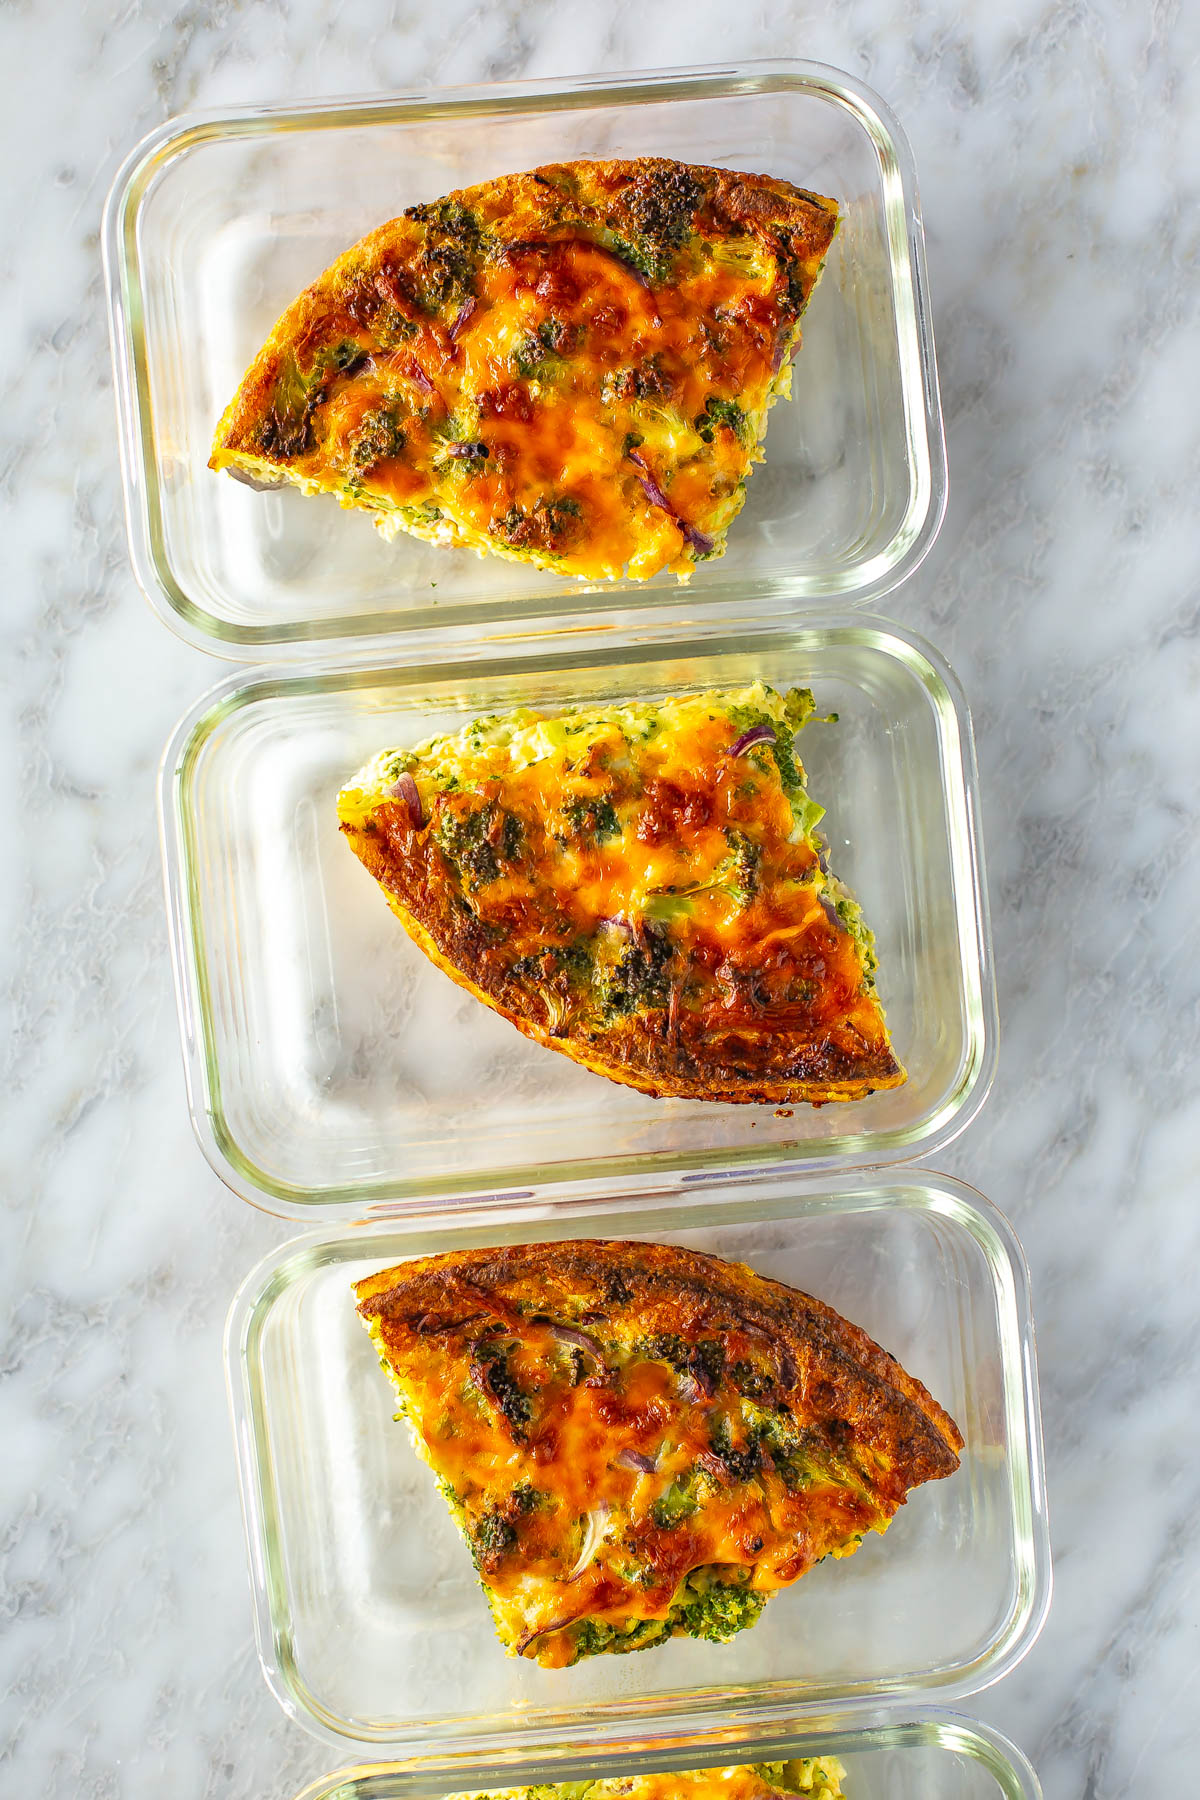 Broccoli Cheddar Quiche in meal prep containers